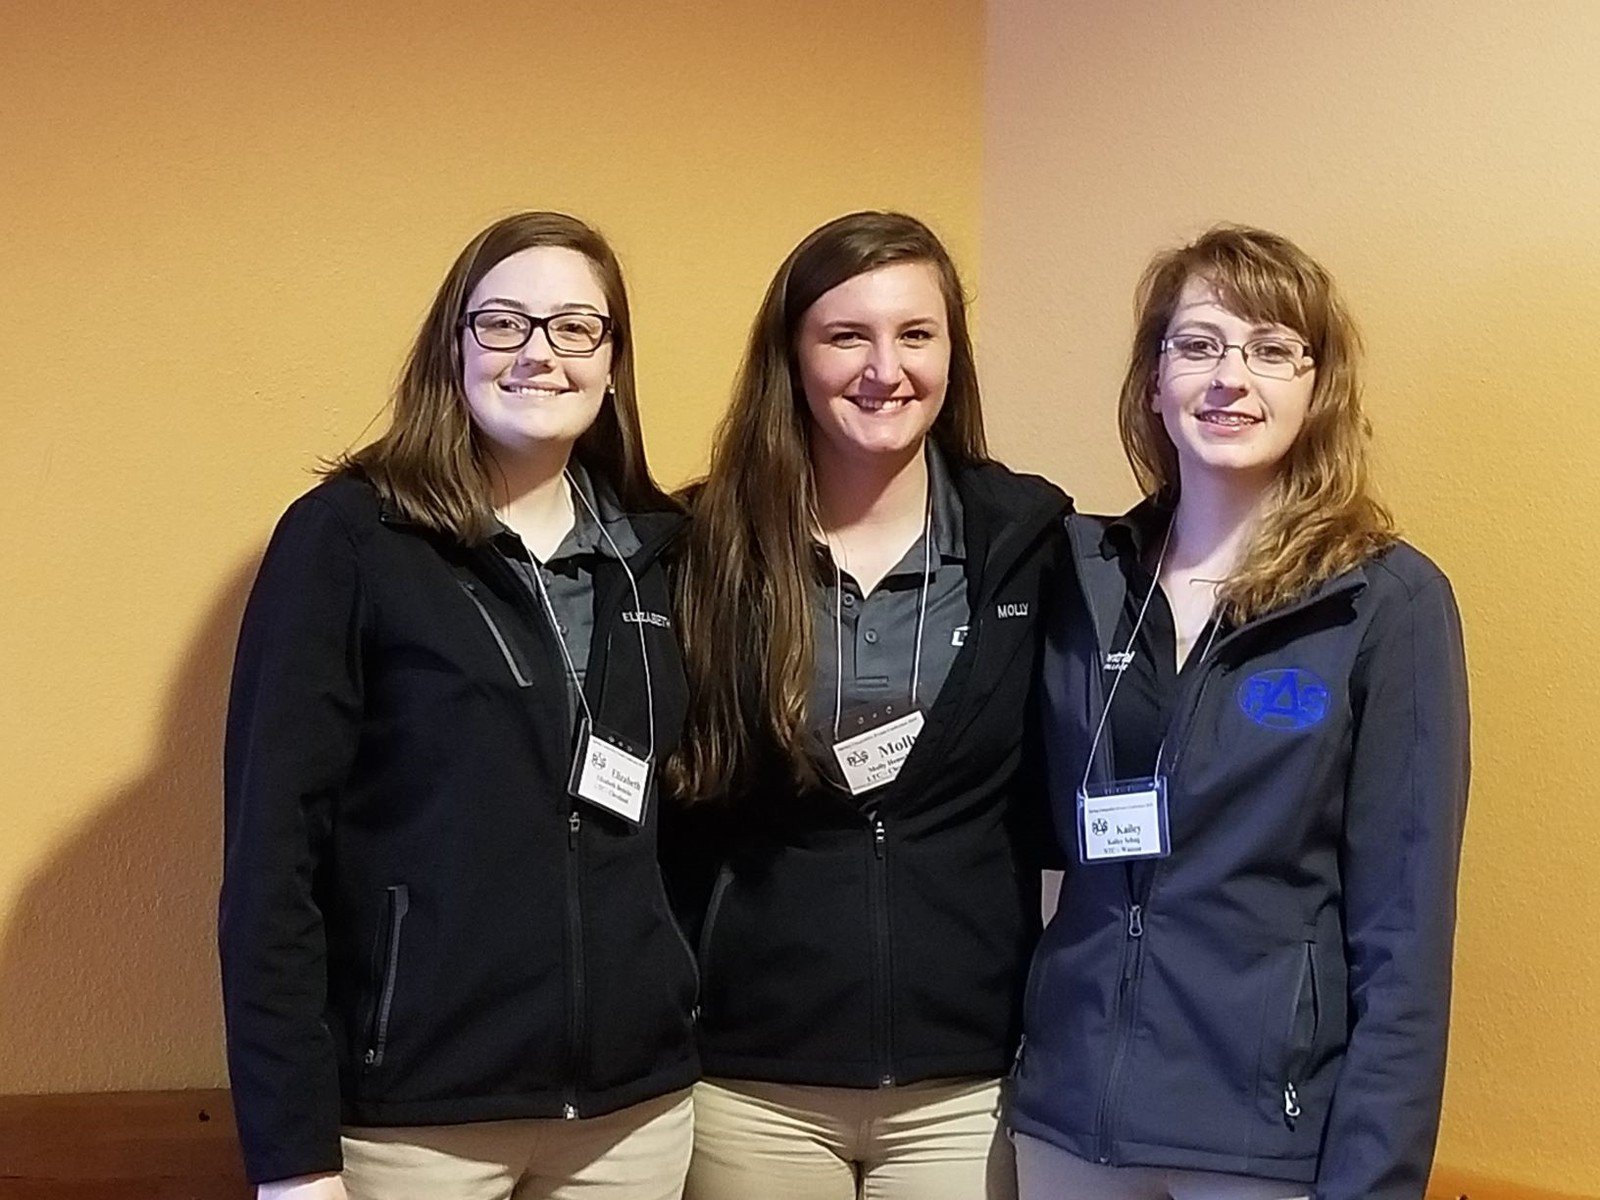 LTC students Elizabeth Benicke and Molly Henschel, and Northcentral Technical College student Kailey Schug took first place in Dairy Specialist Team competition at the state Professional Agricultural Student competition.